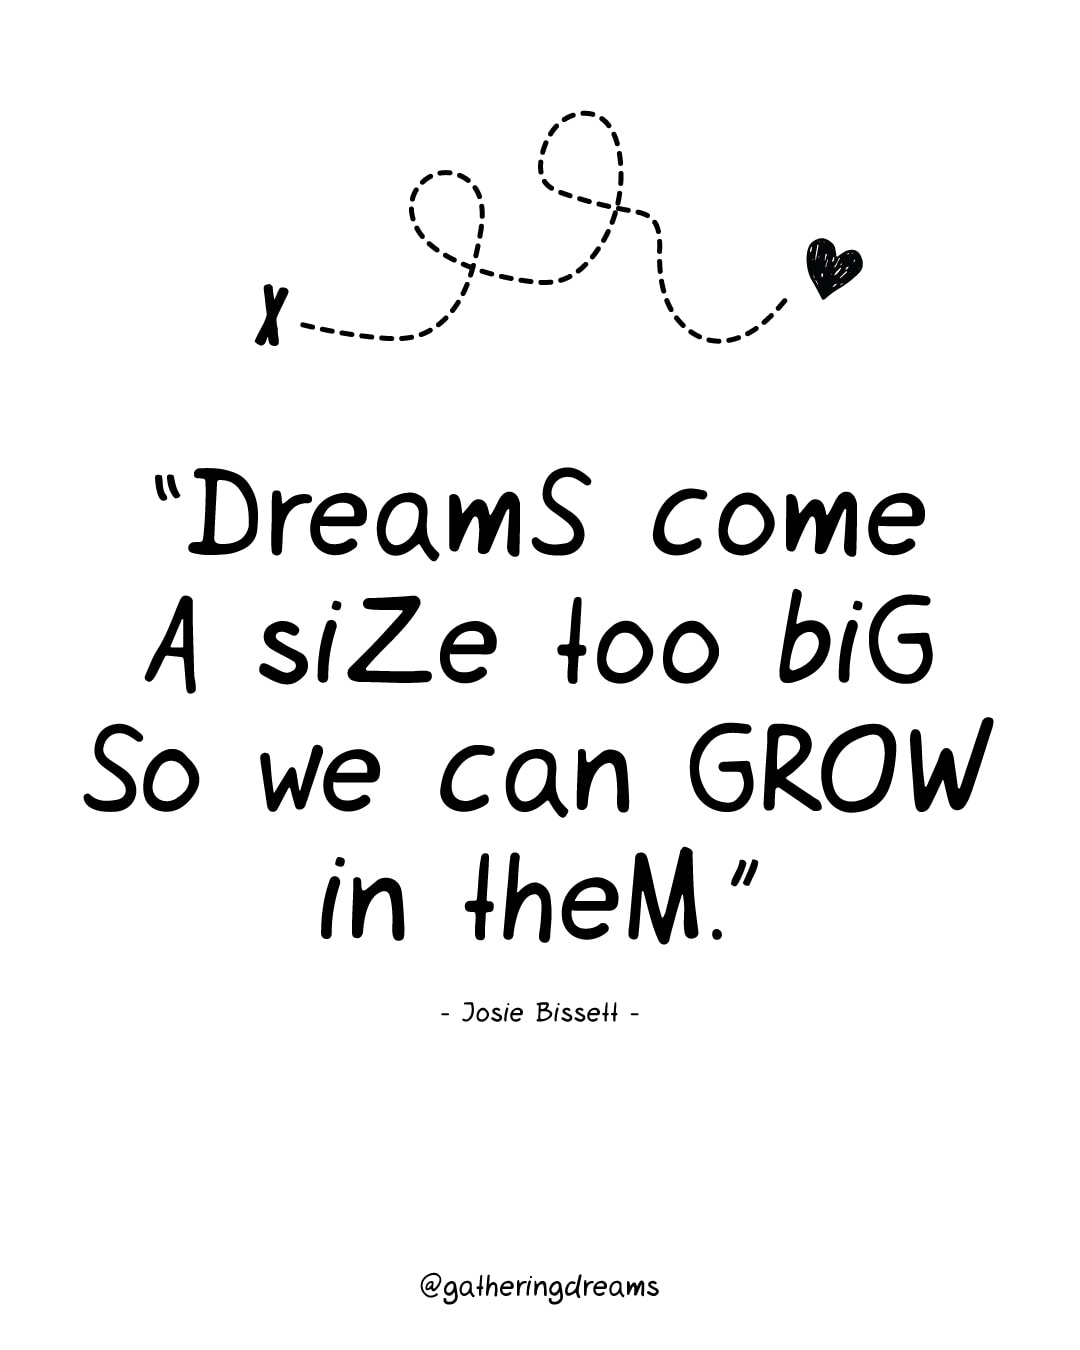 Josie Bissett quote: Dreams come a size too big so we can grow